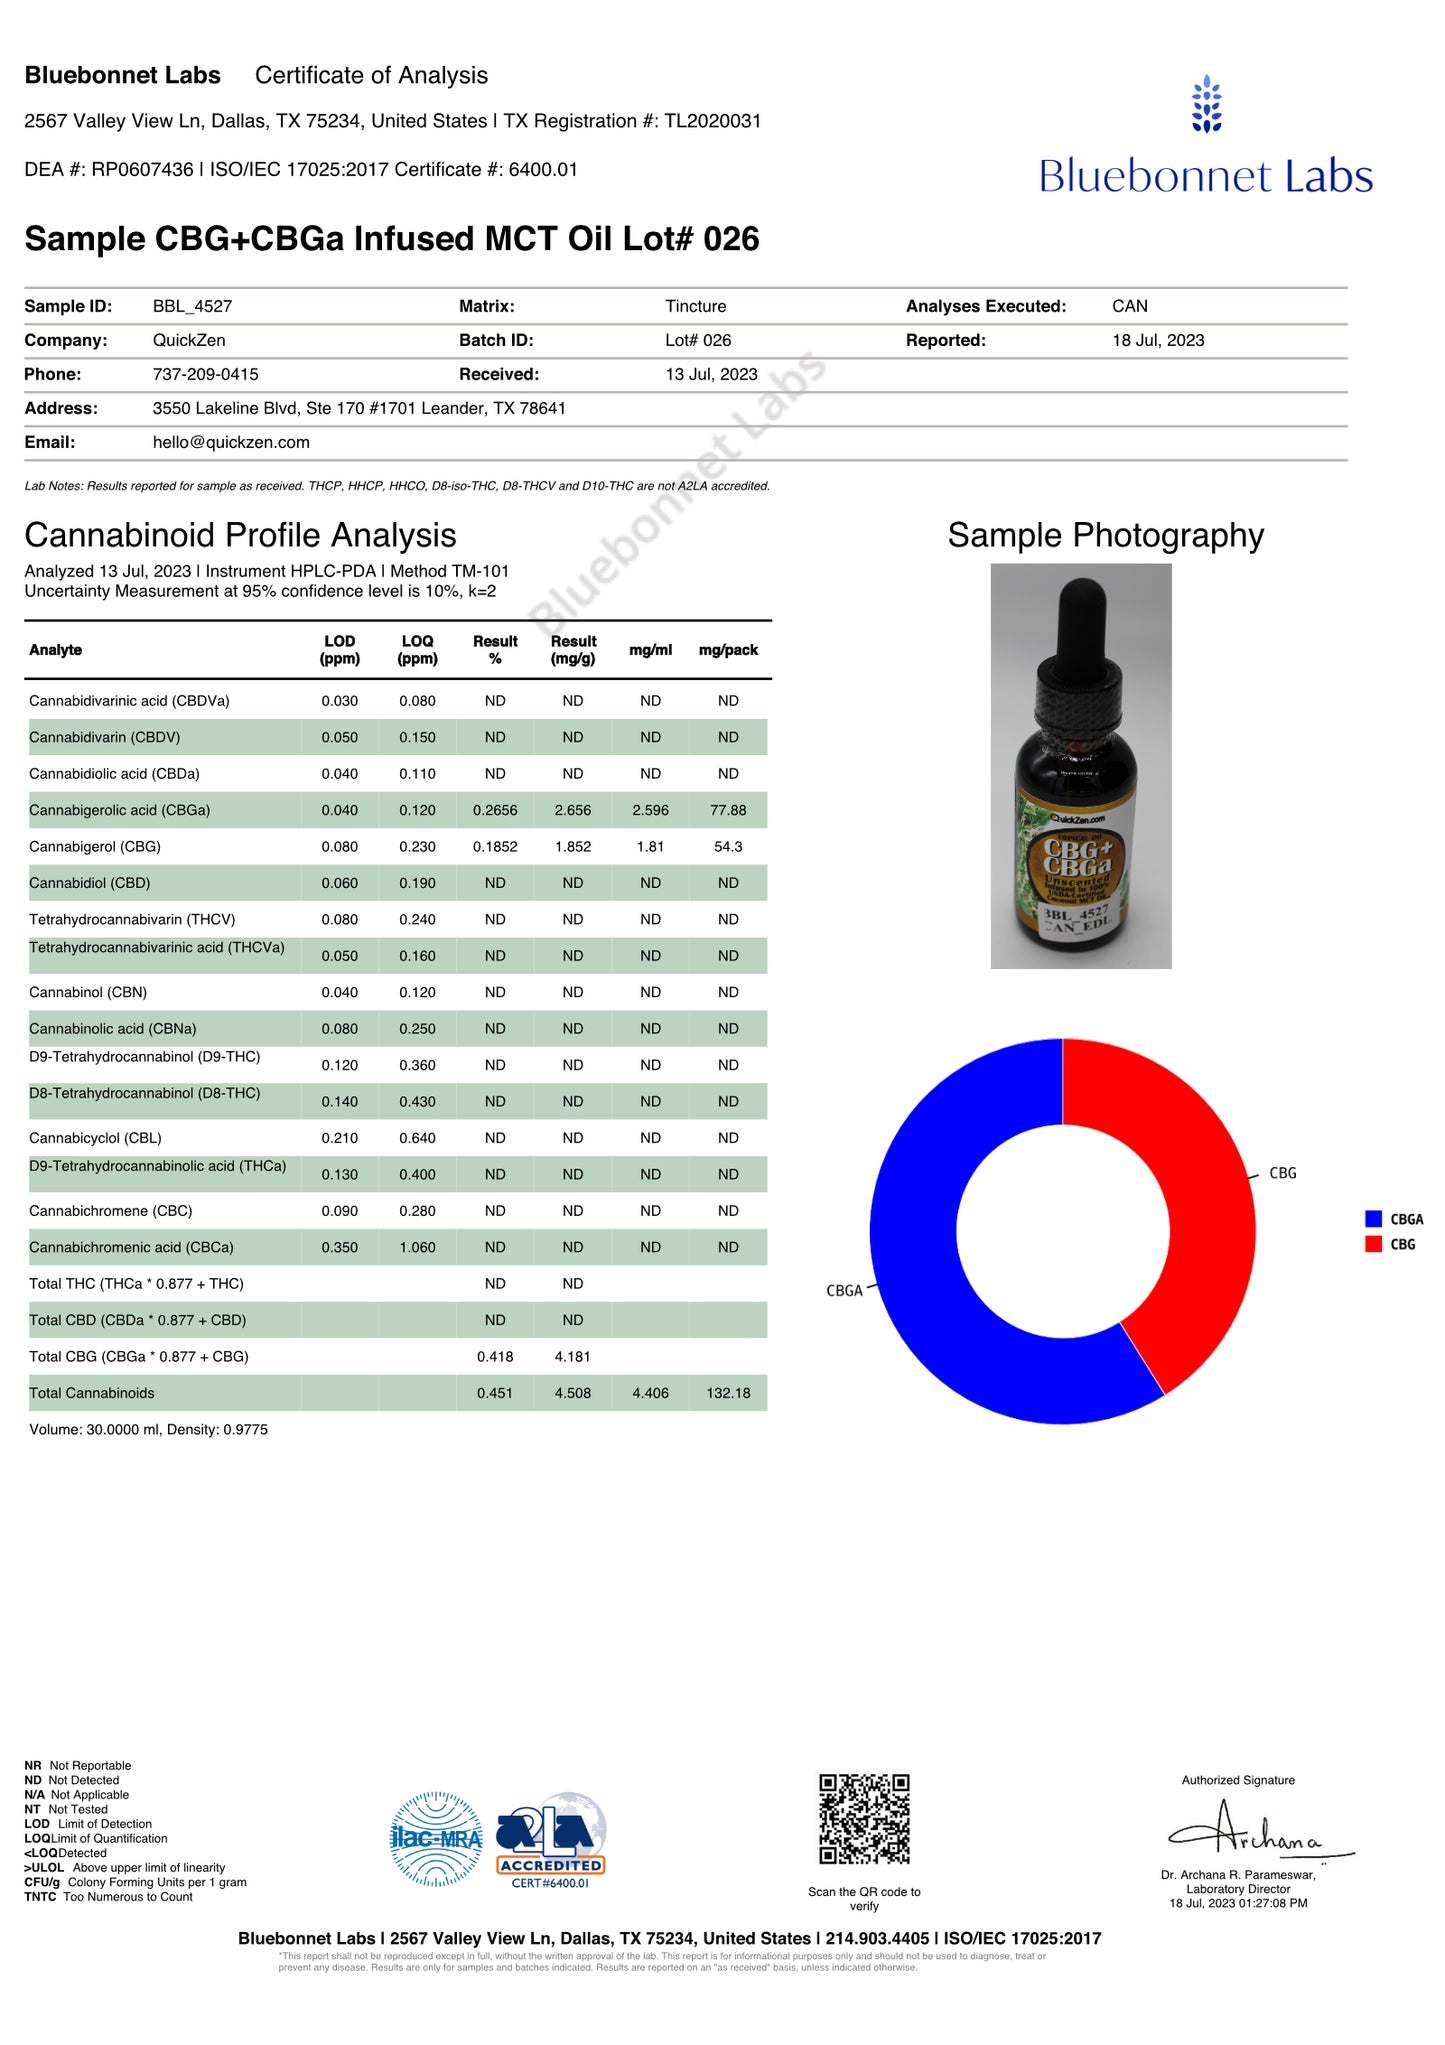 Lot 026 oil cannabinoids profile analysis. Blue Bonnet Laboratories Certified Test Results.